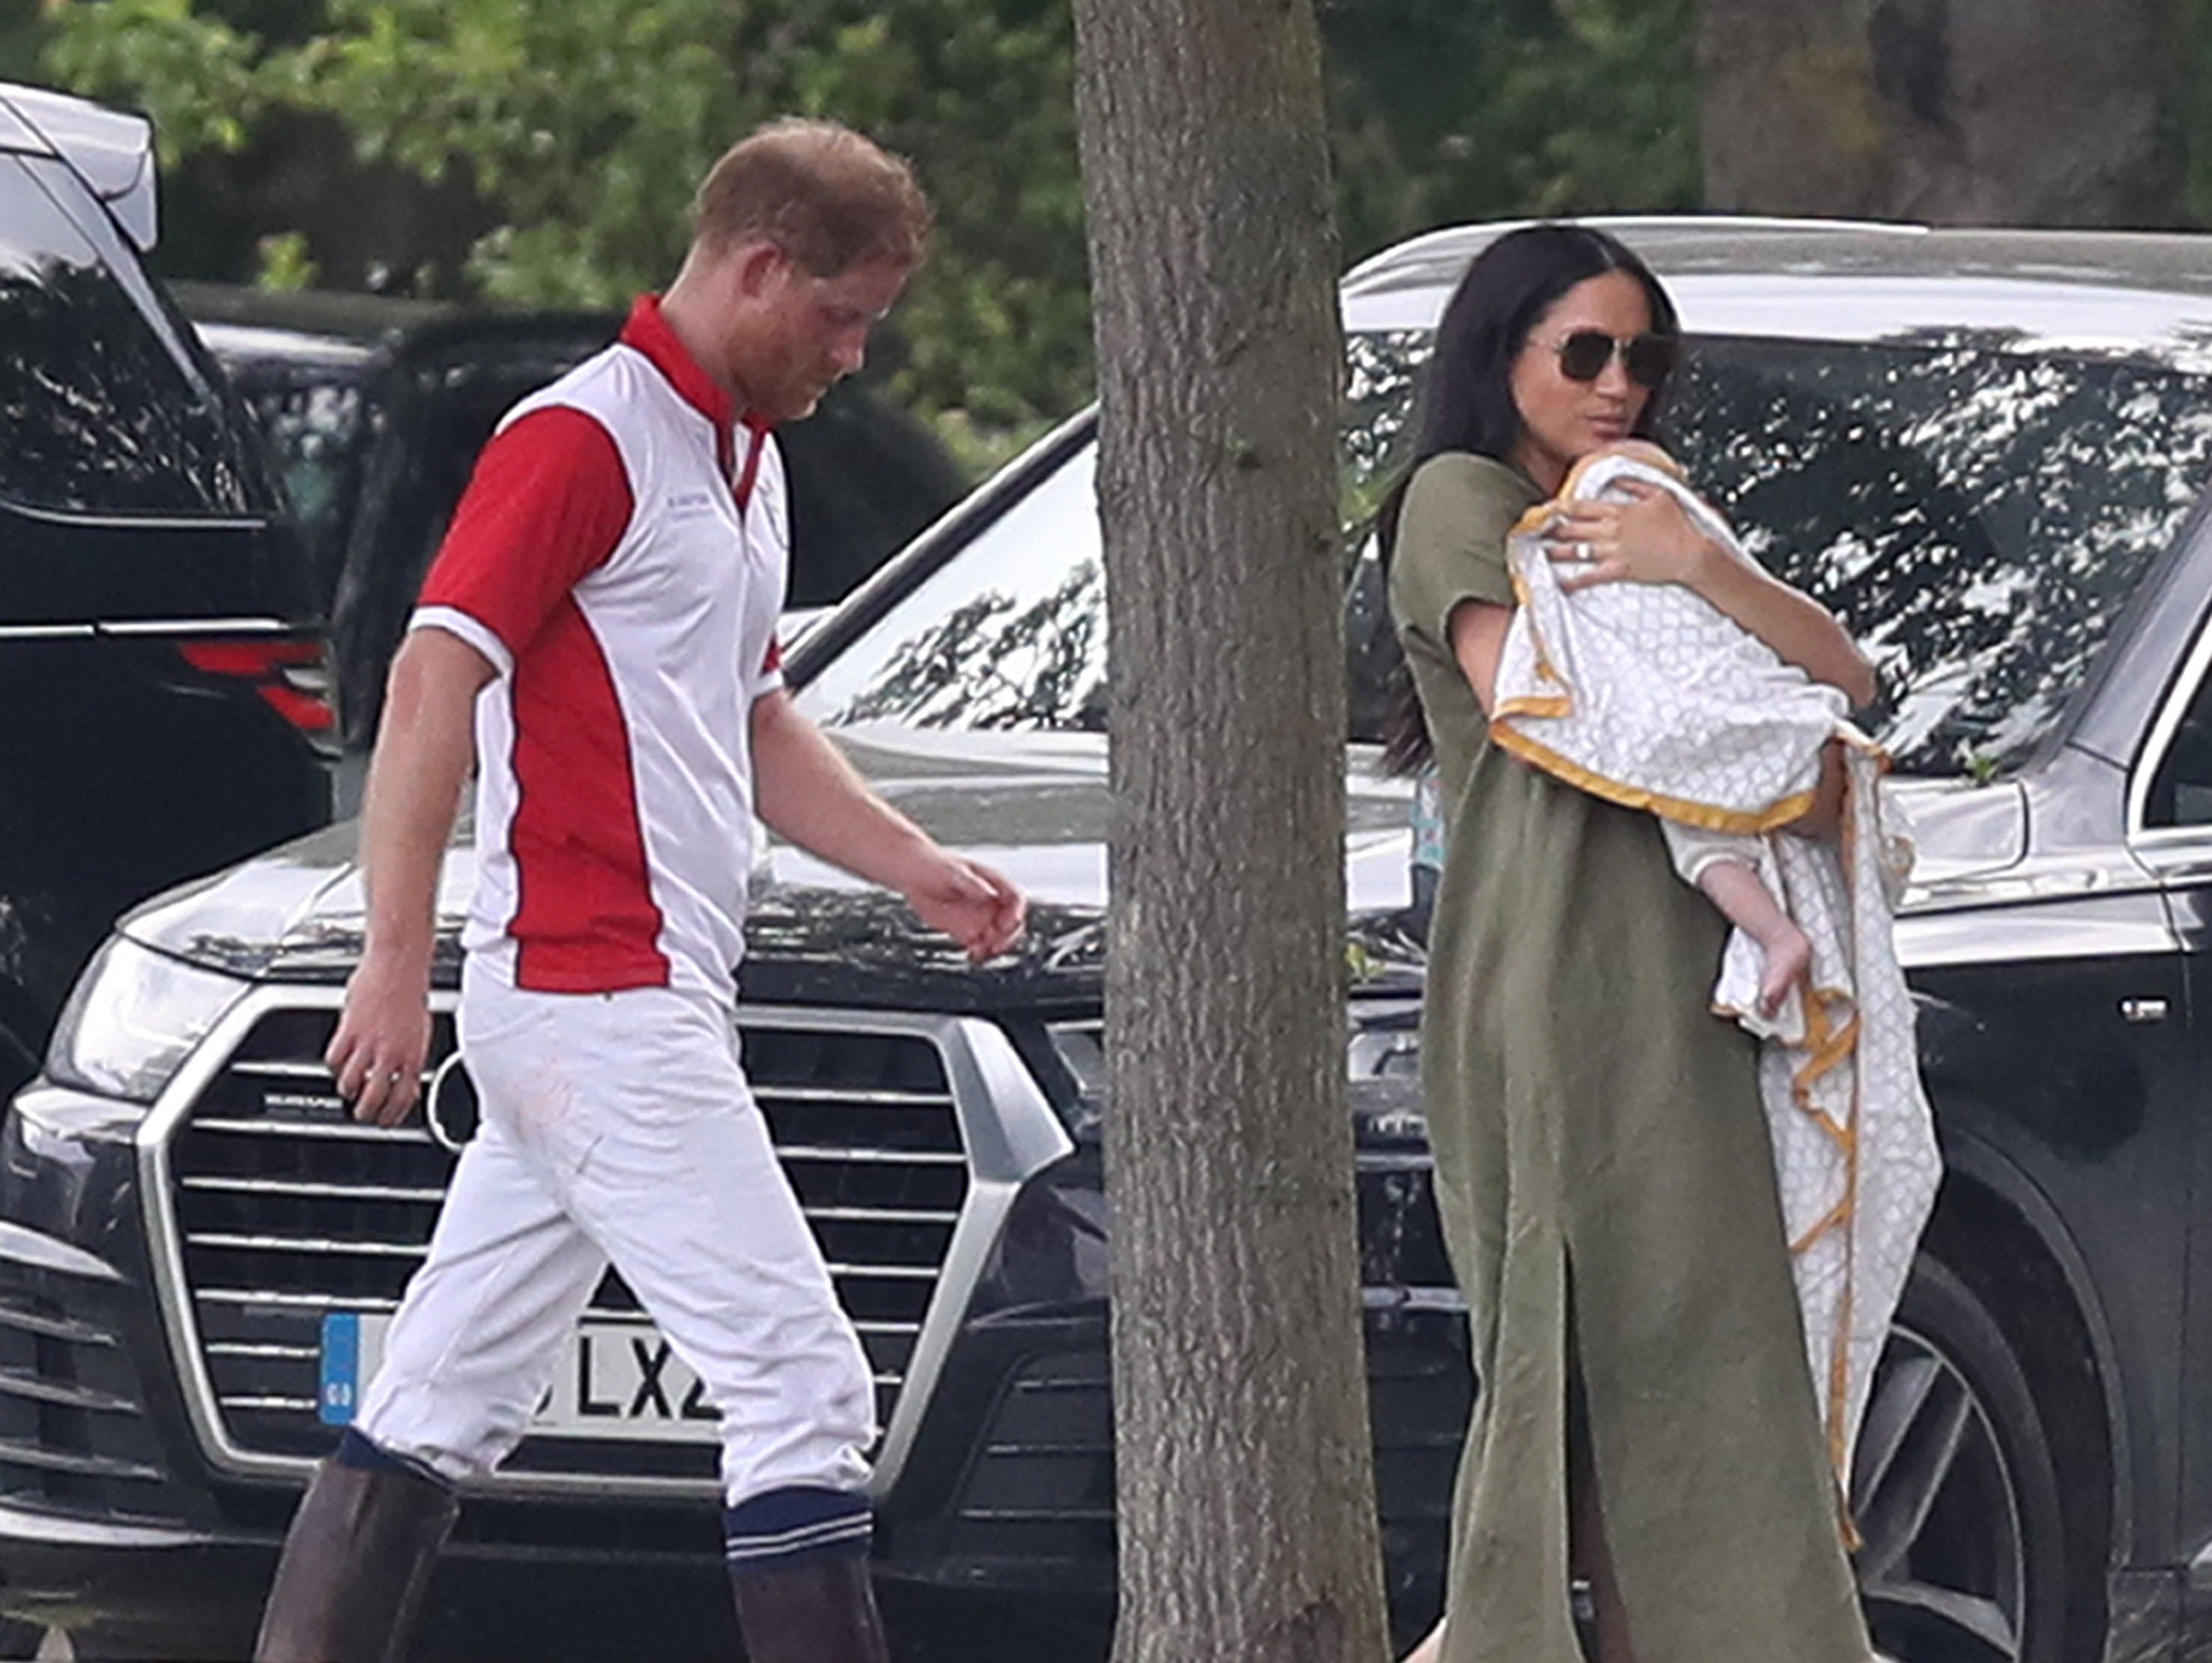 The Duke and Duchess of Sussex with their son Archie as they the King Power Royal Charity Polo Day at Billingbear Polo Club, Wokingham, Berkshire.